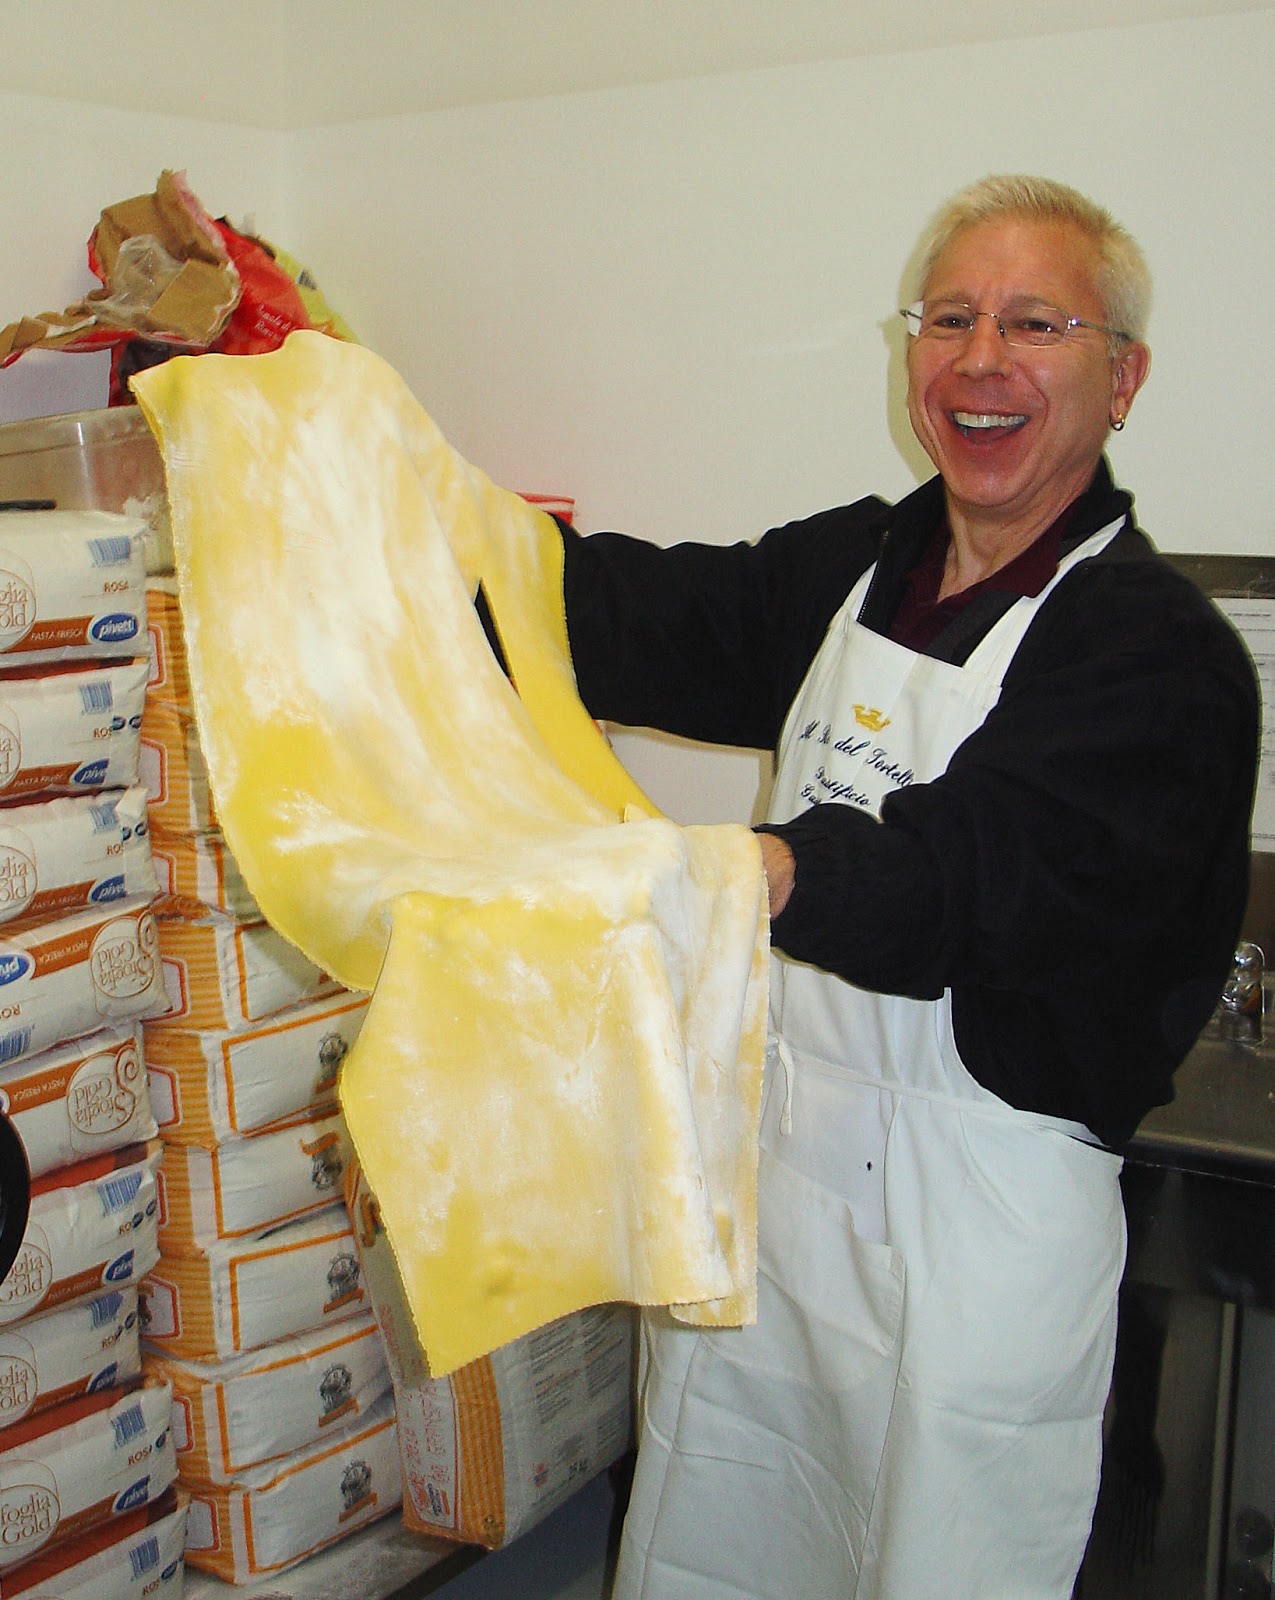 Humongous pressed sheets of tortellini dough are ready for the table.